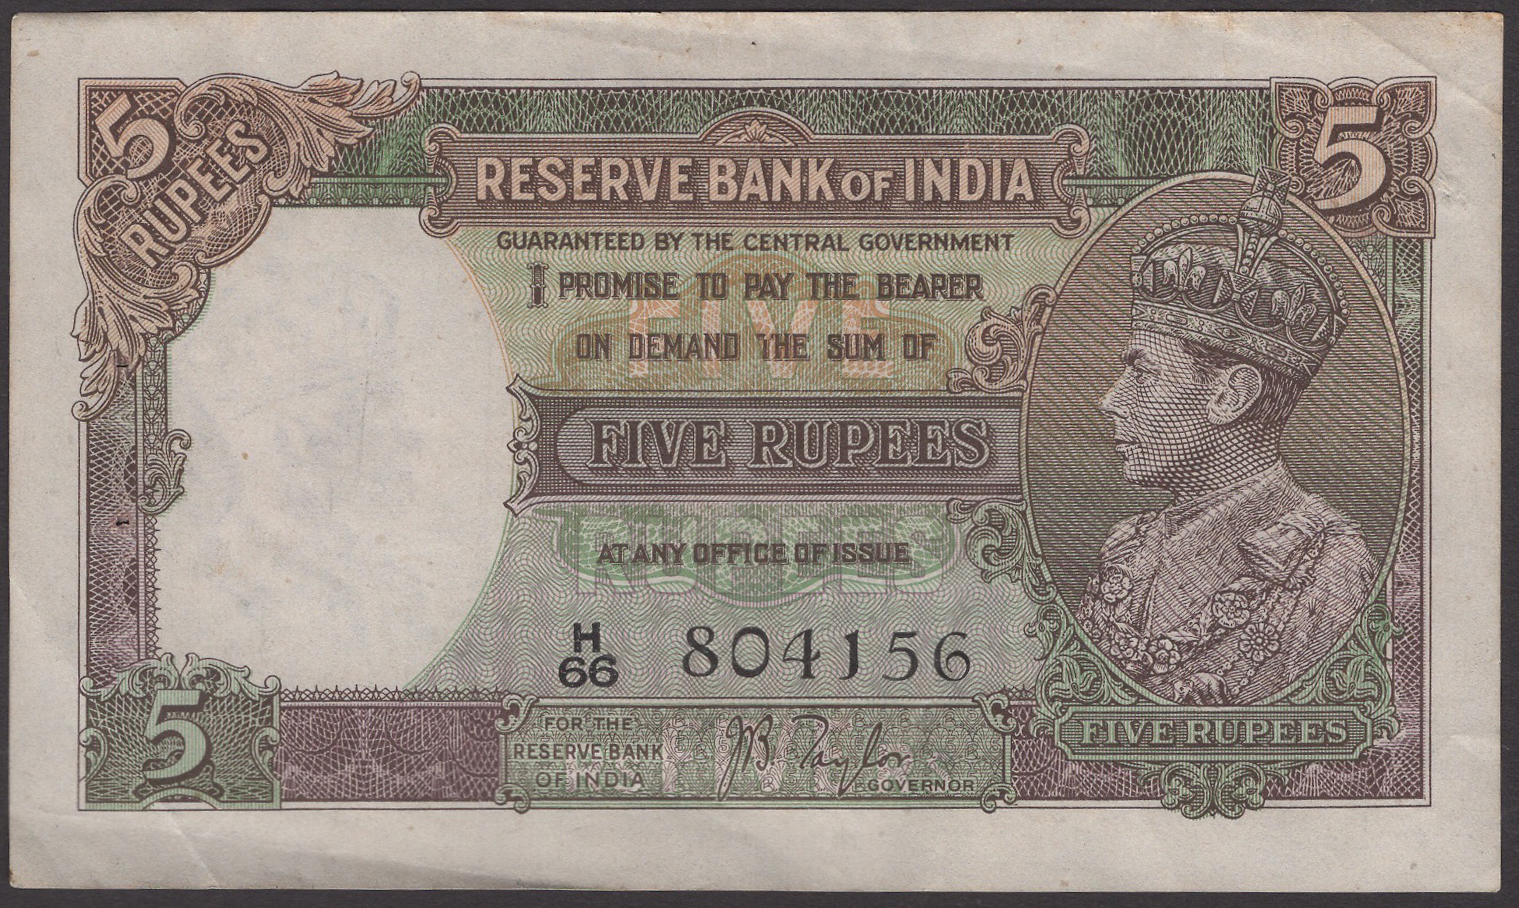 Reserve Bank of India, 5 Rupees (7), ND (1937), consecutive serial numbers H/66 804150-56,... - Image 5 of 6